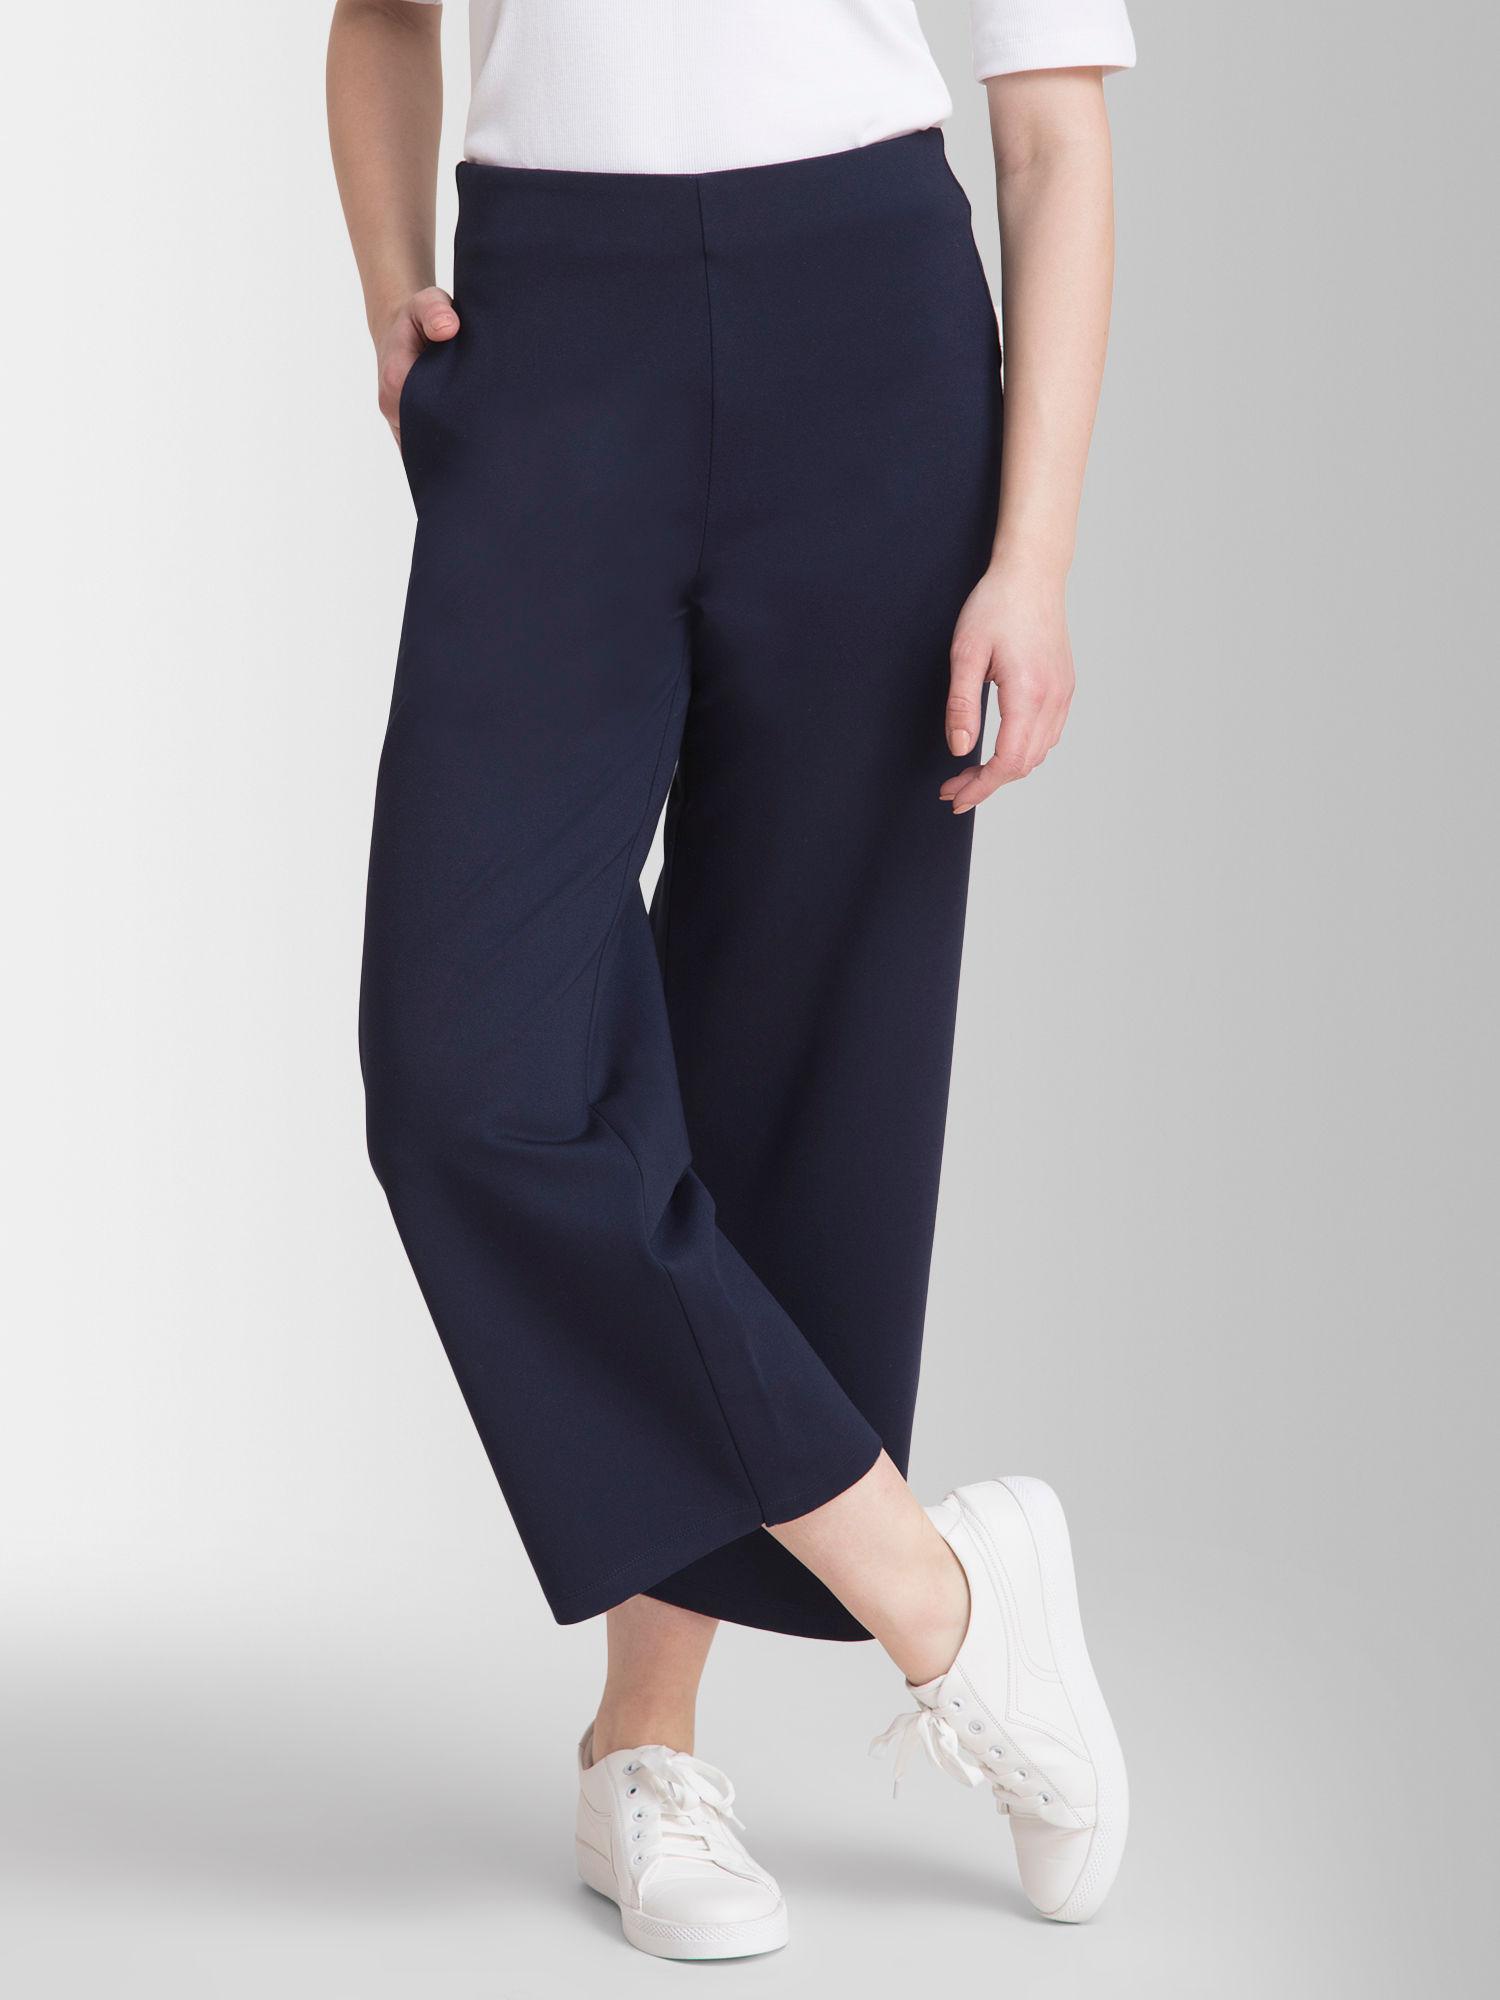 women livin loose fit solid culottes - navy blue